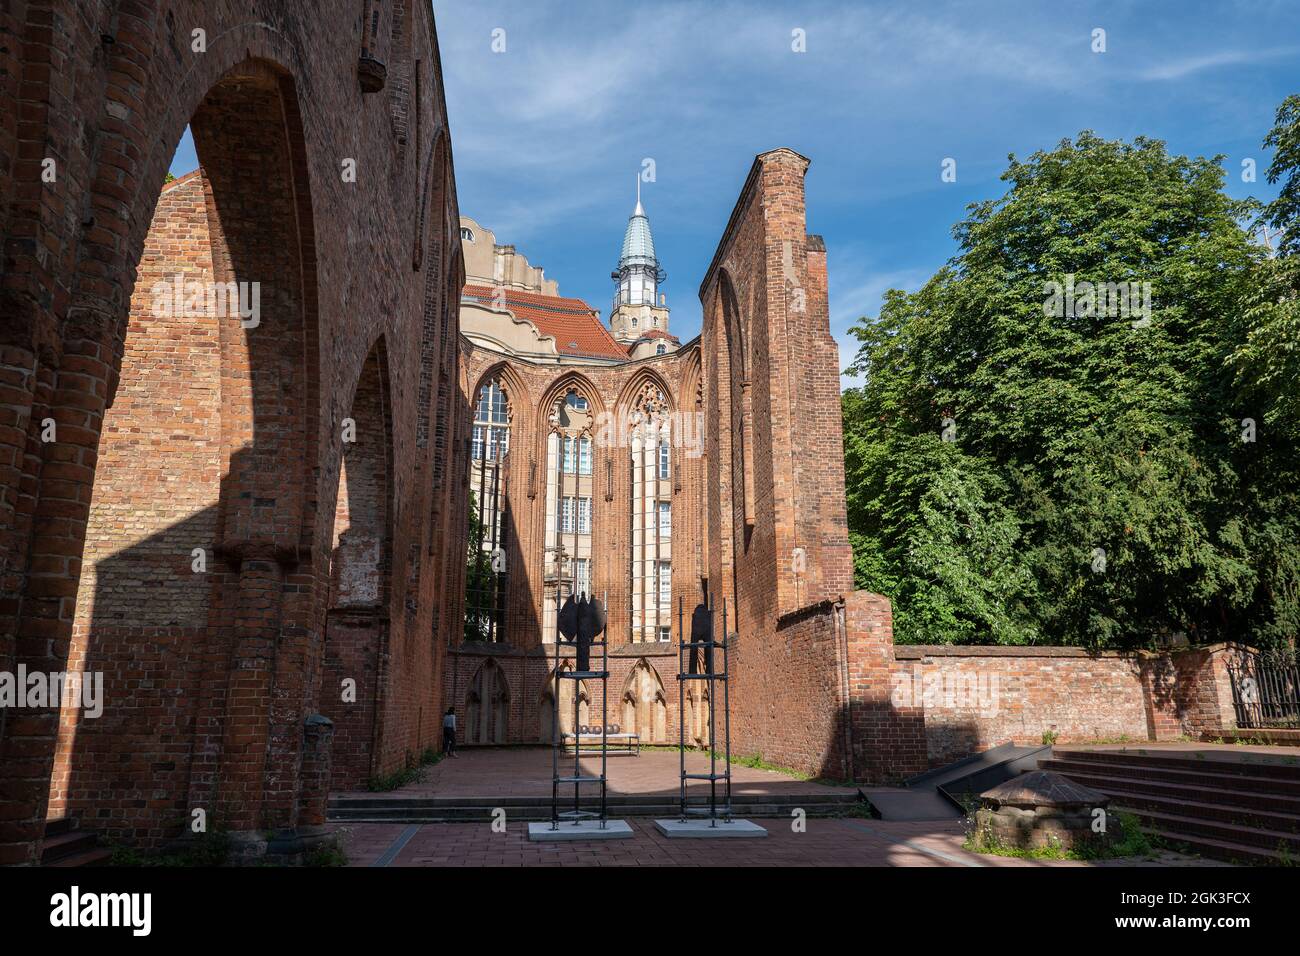 Franziskaner Klosterkirche ruins in Berlin, Germany, Gothic style monastery church founded in 1250. Stock Photo